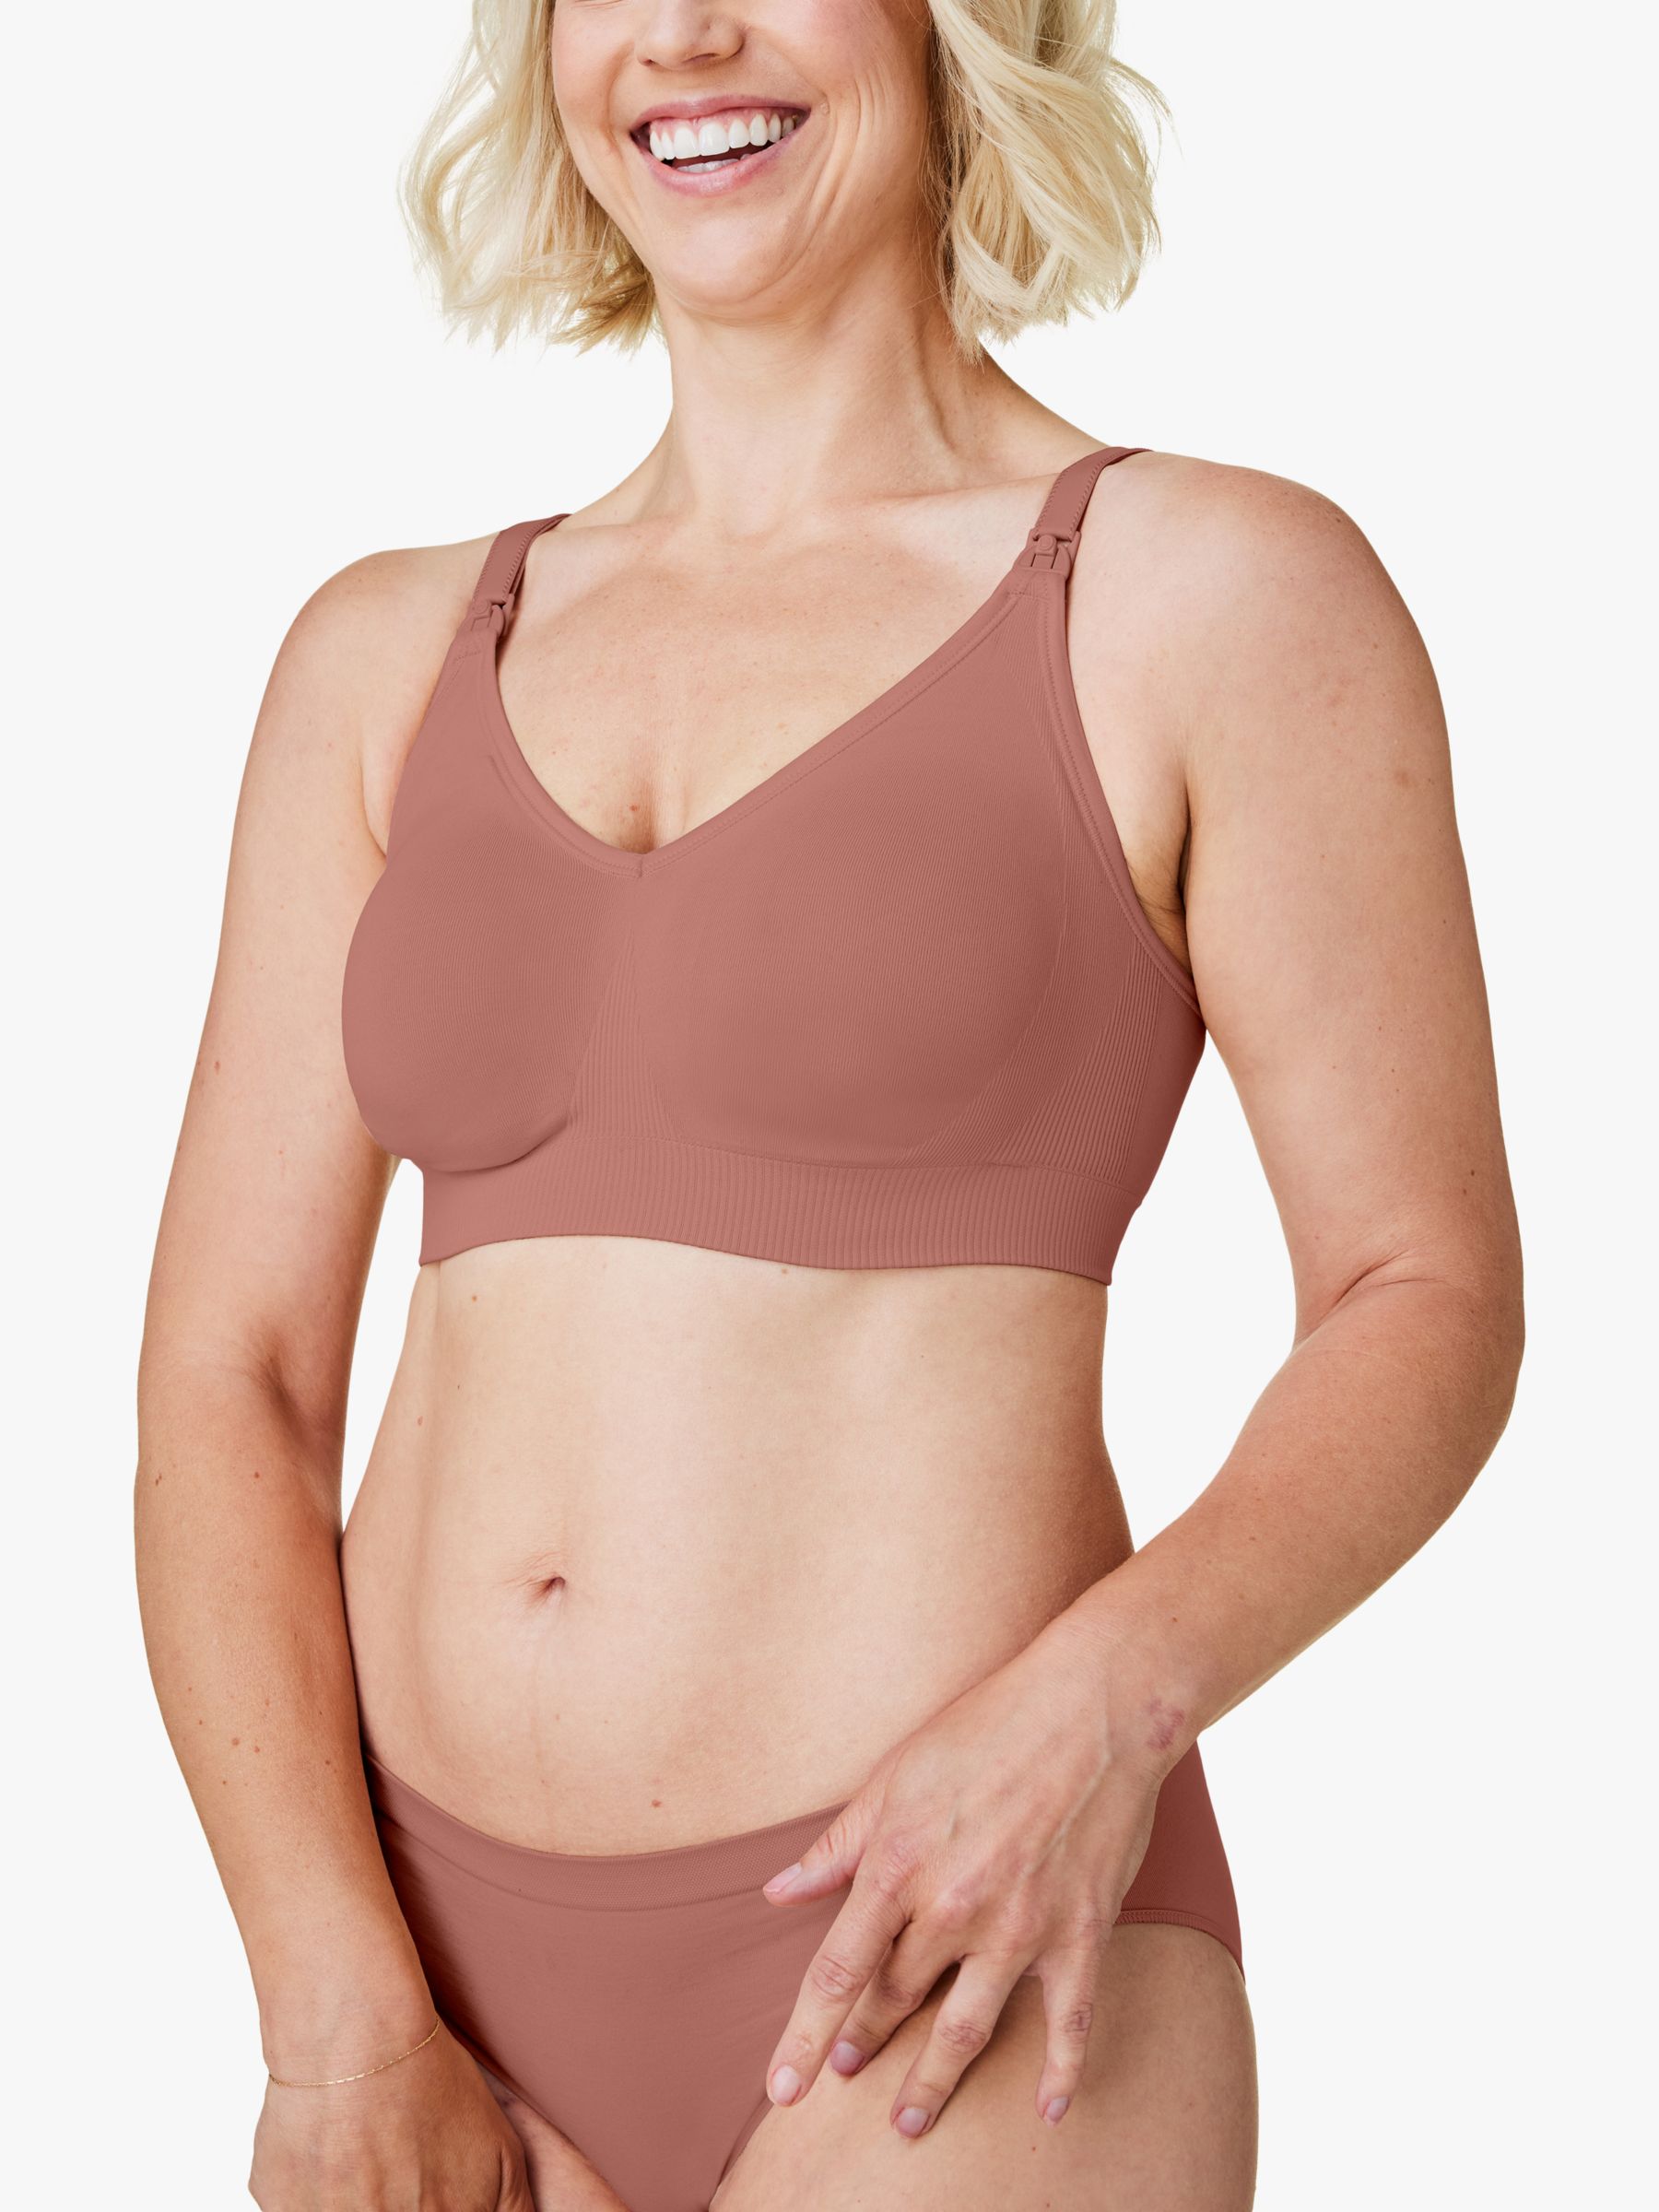 HauteMama Maternity - What is the best holiday gift for a mom-to-be or new  mama? The perfect bra! The 24/7 bra flexibly adapts to your bust size to  fit snugly during pregnancy